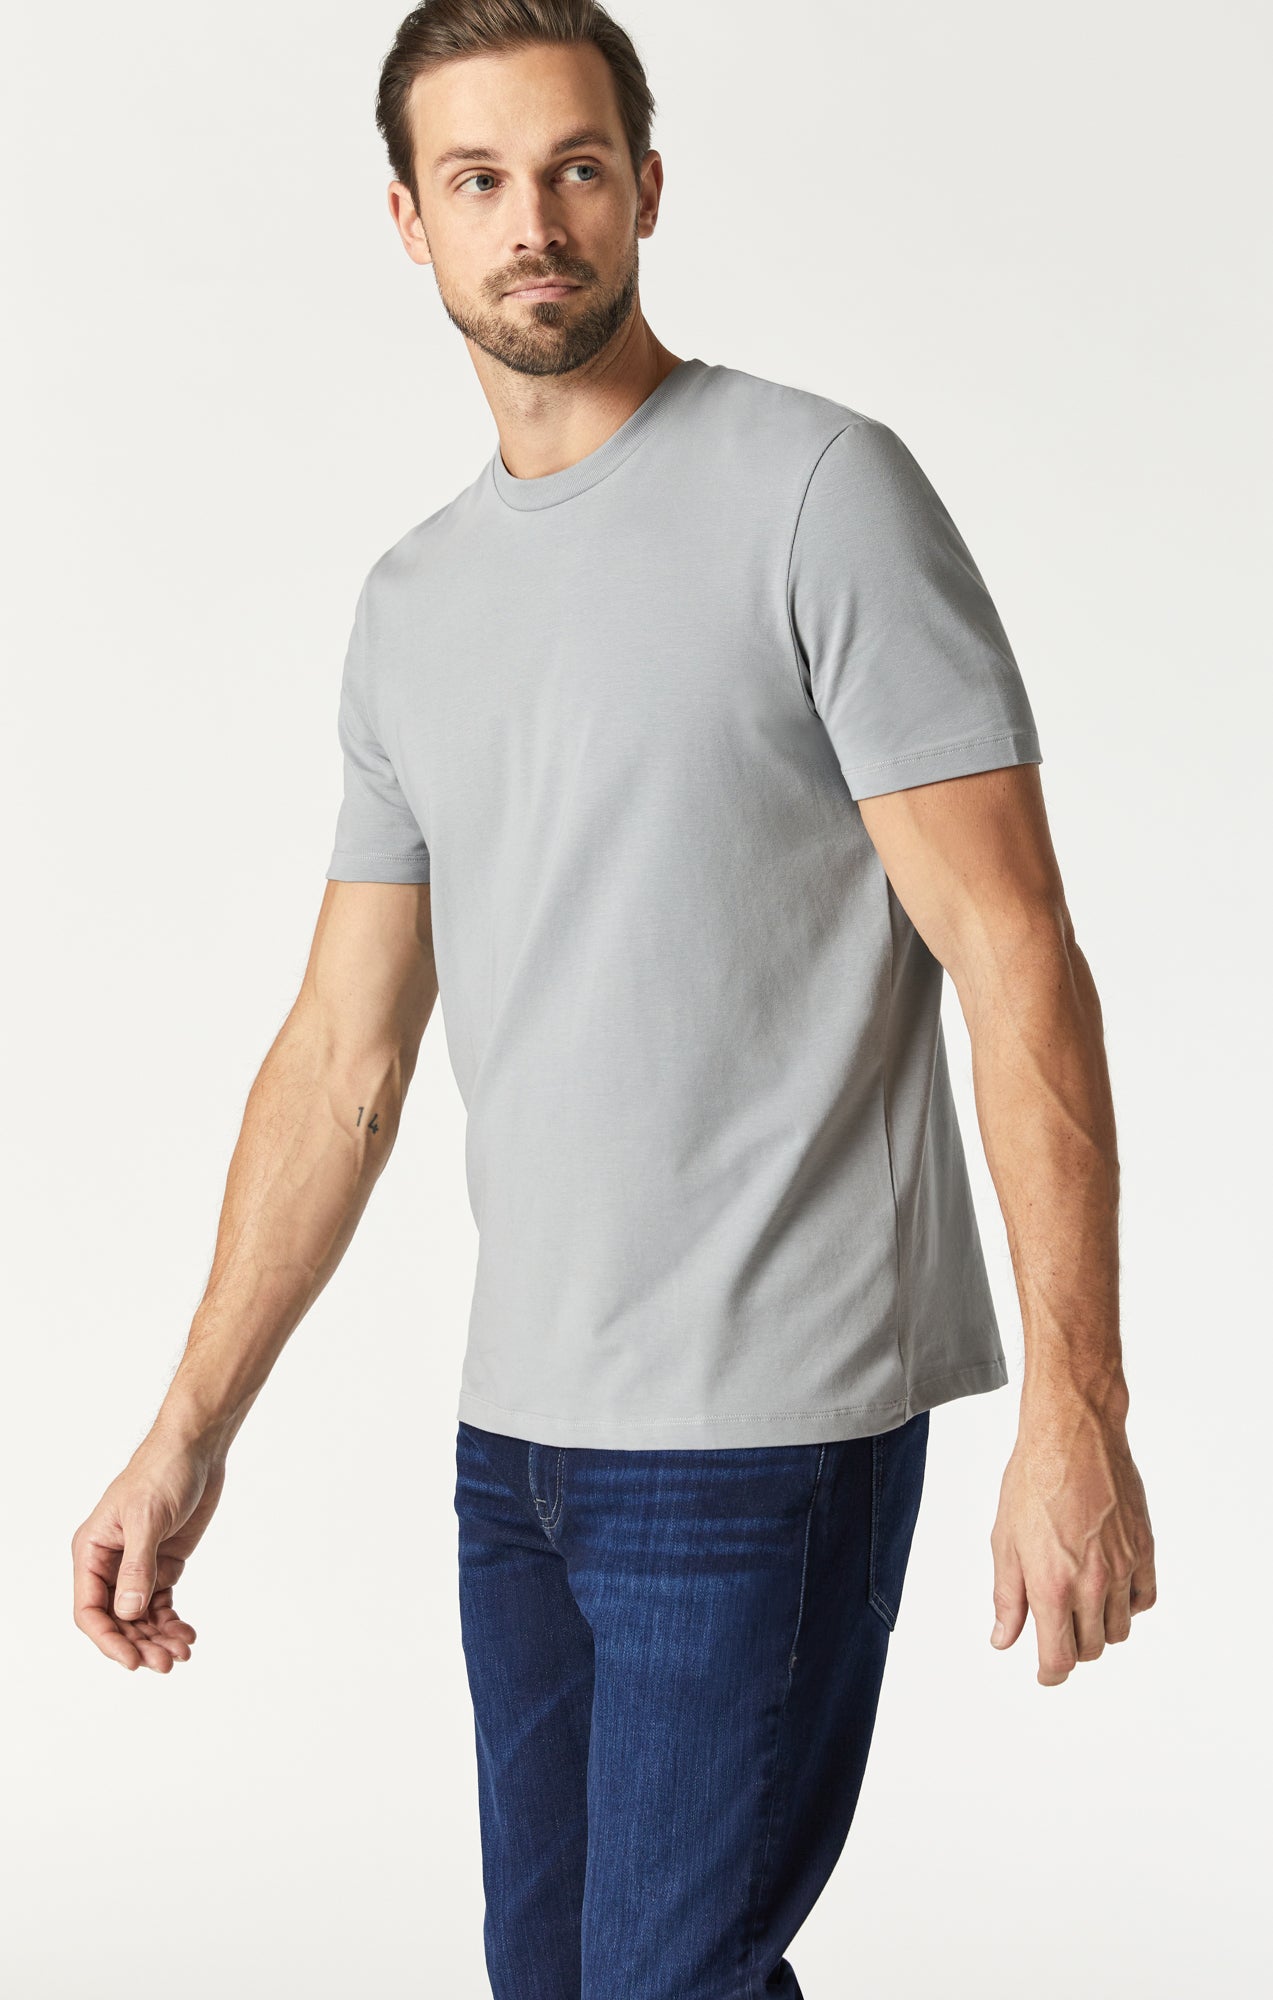 YUHAOTIN 4/July T-Shirts for Men Cotton Without Sleeves Mens